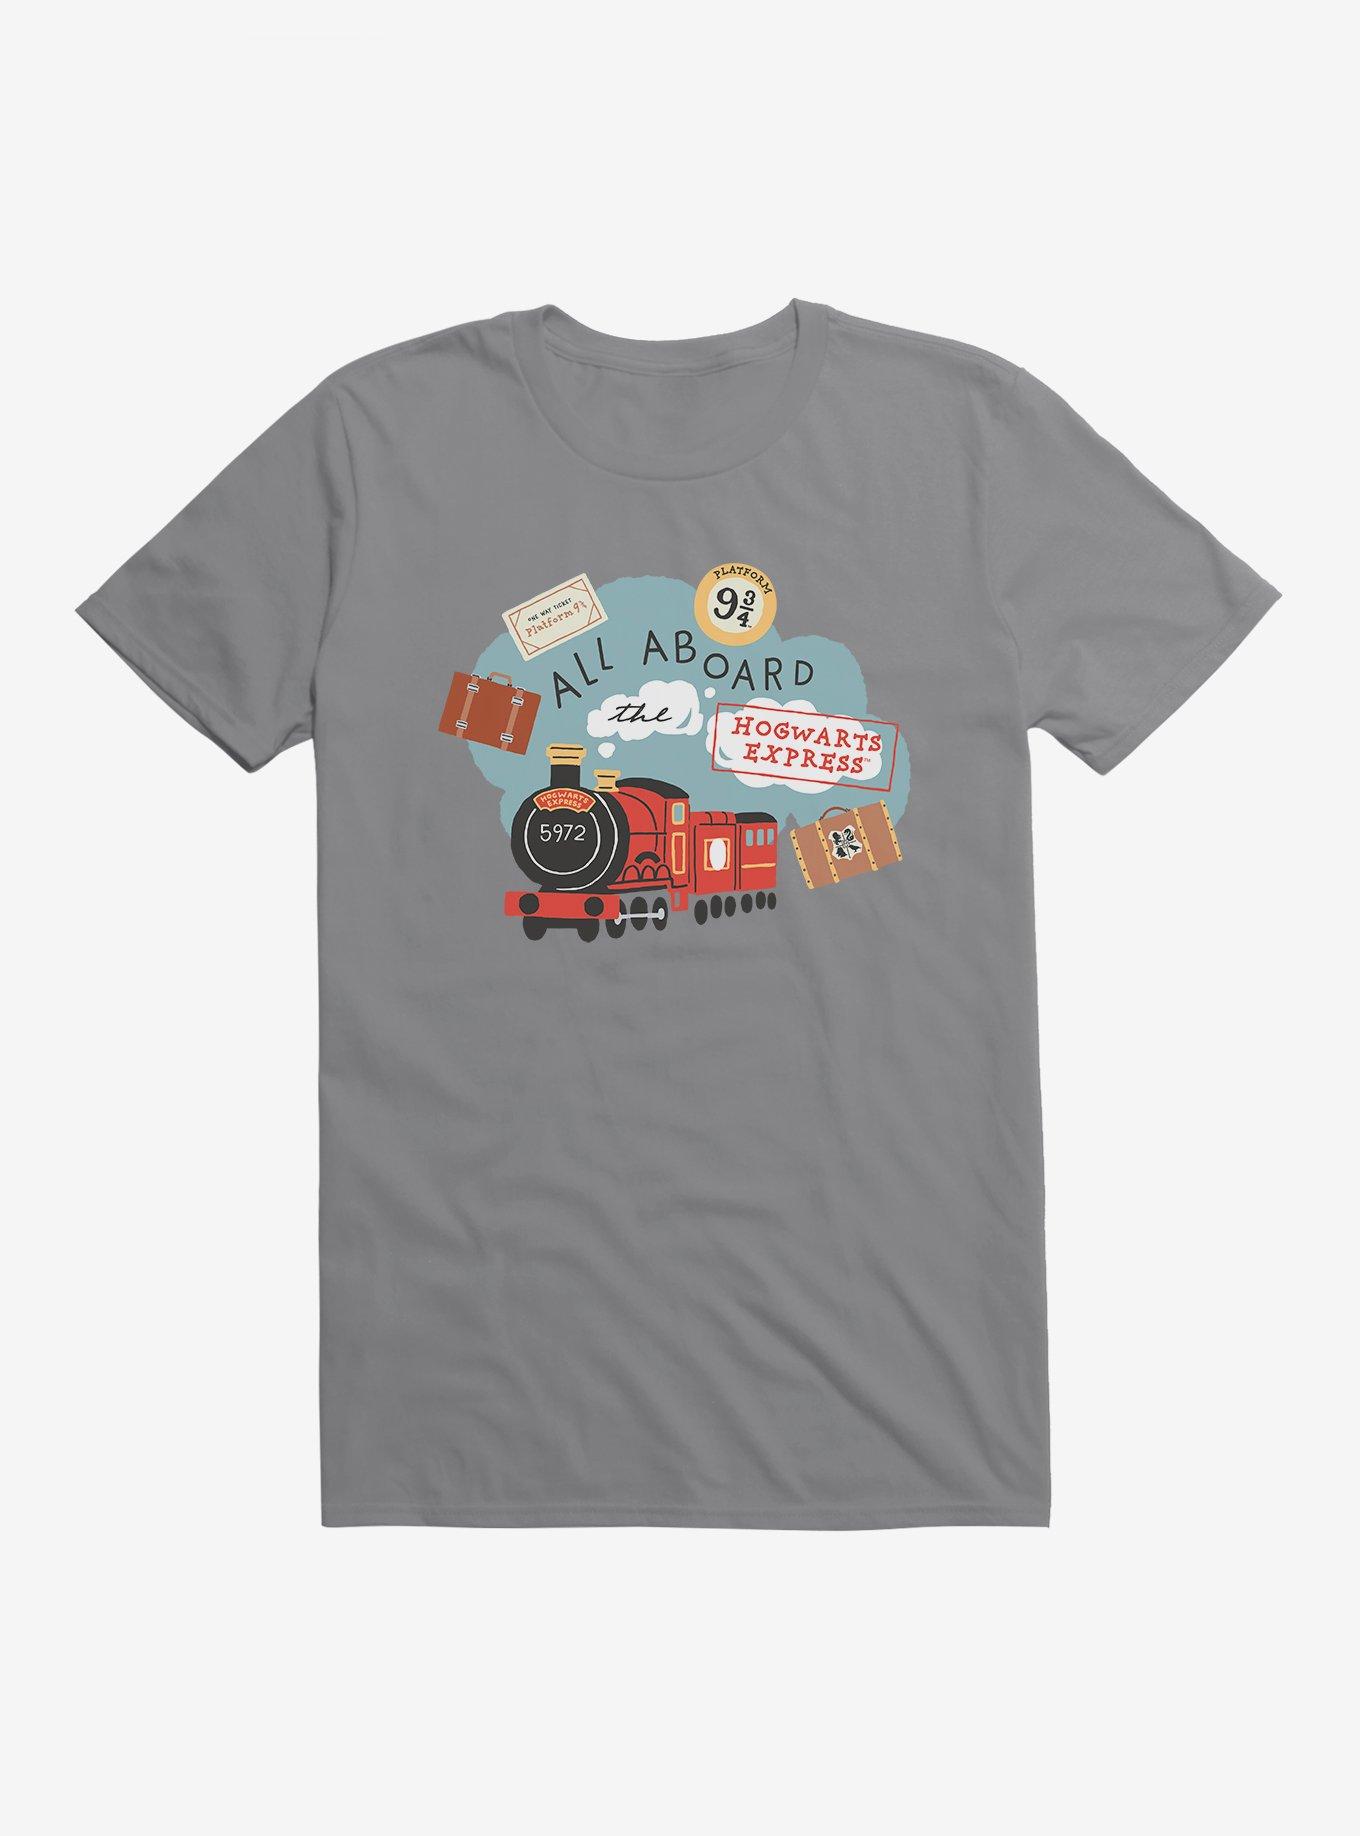 Harry Potter All Aboard T-Shirt